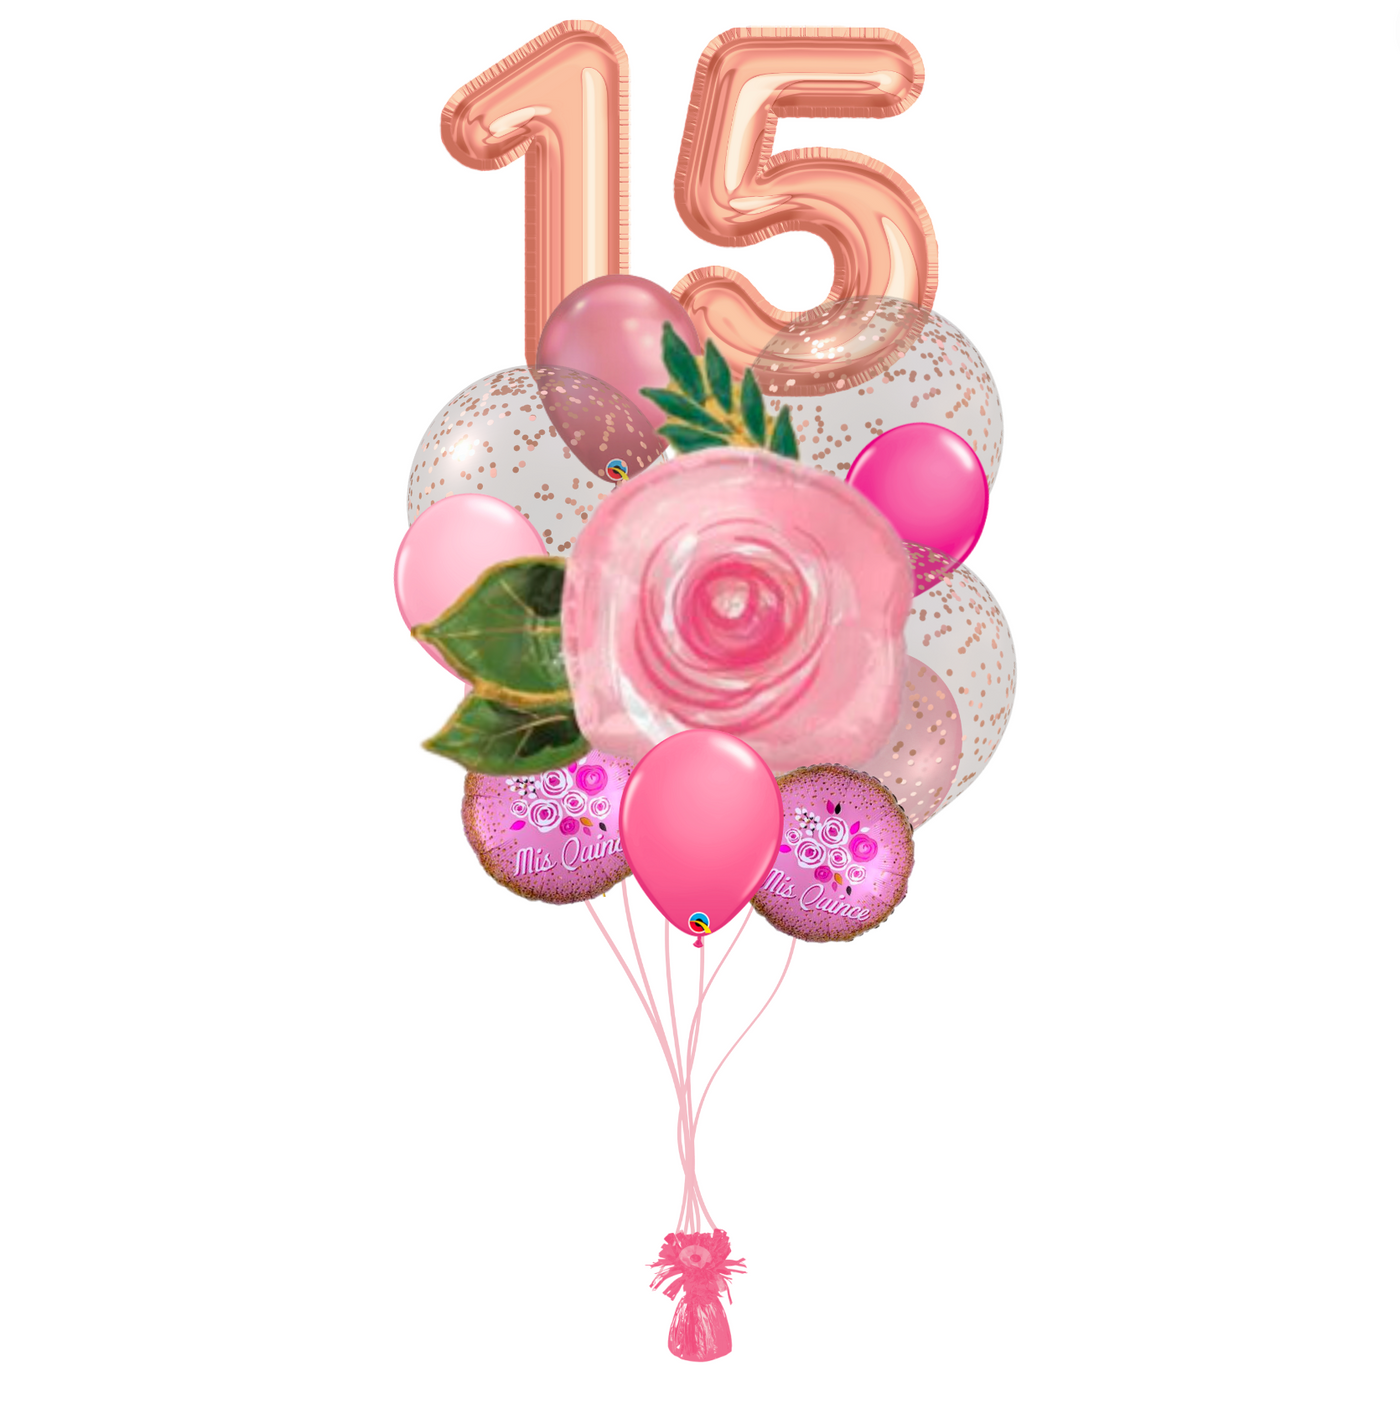 Mis Quince 15th Bday Bouquet